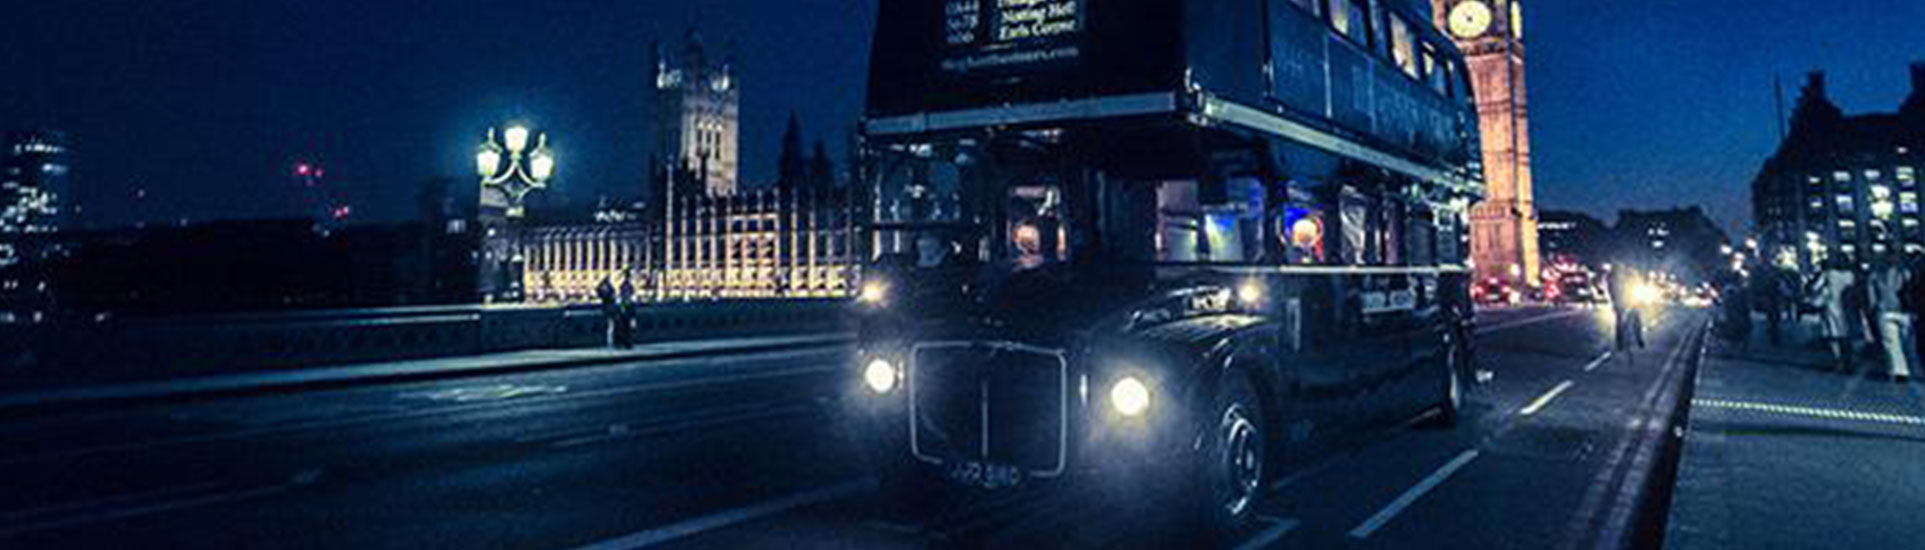 tourhub | Just Go Holidays | The Ghost Bus Tour of London & Capital Delights 